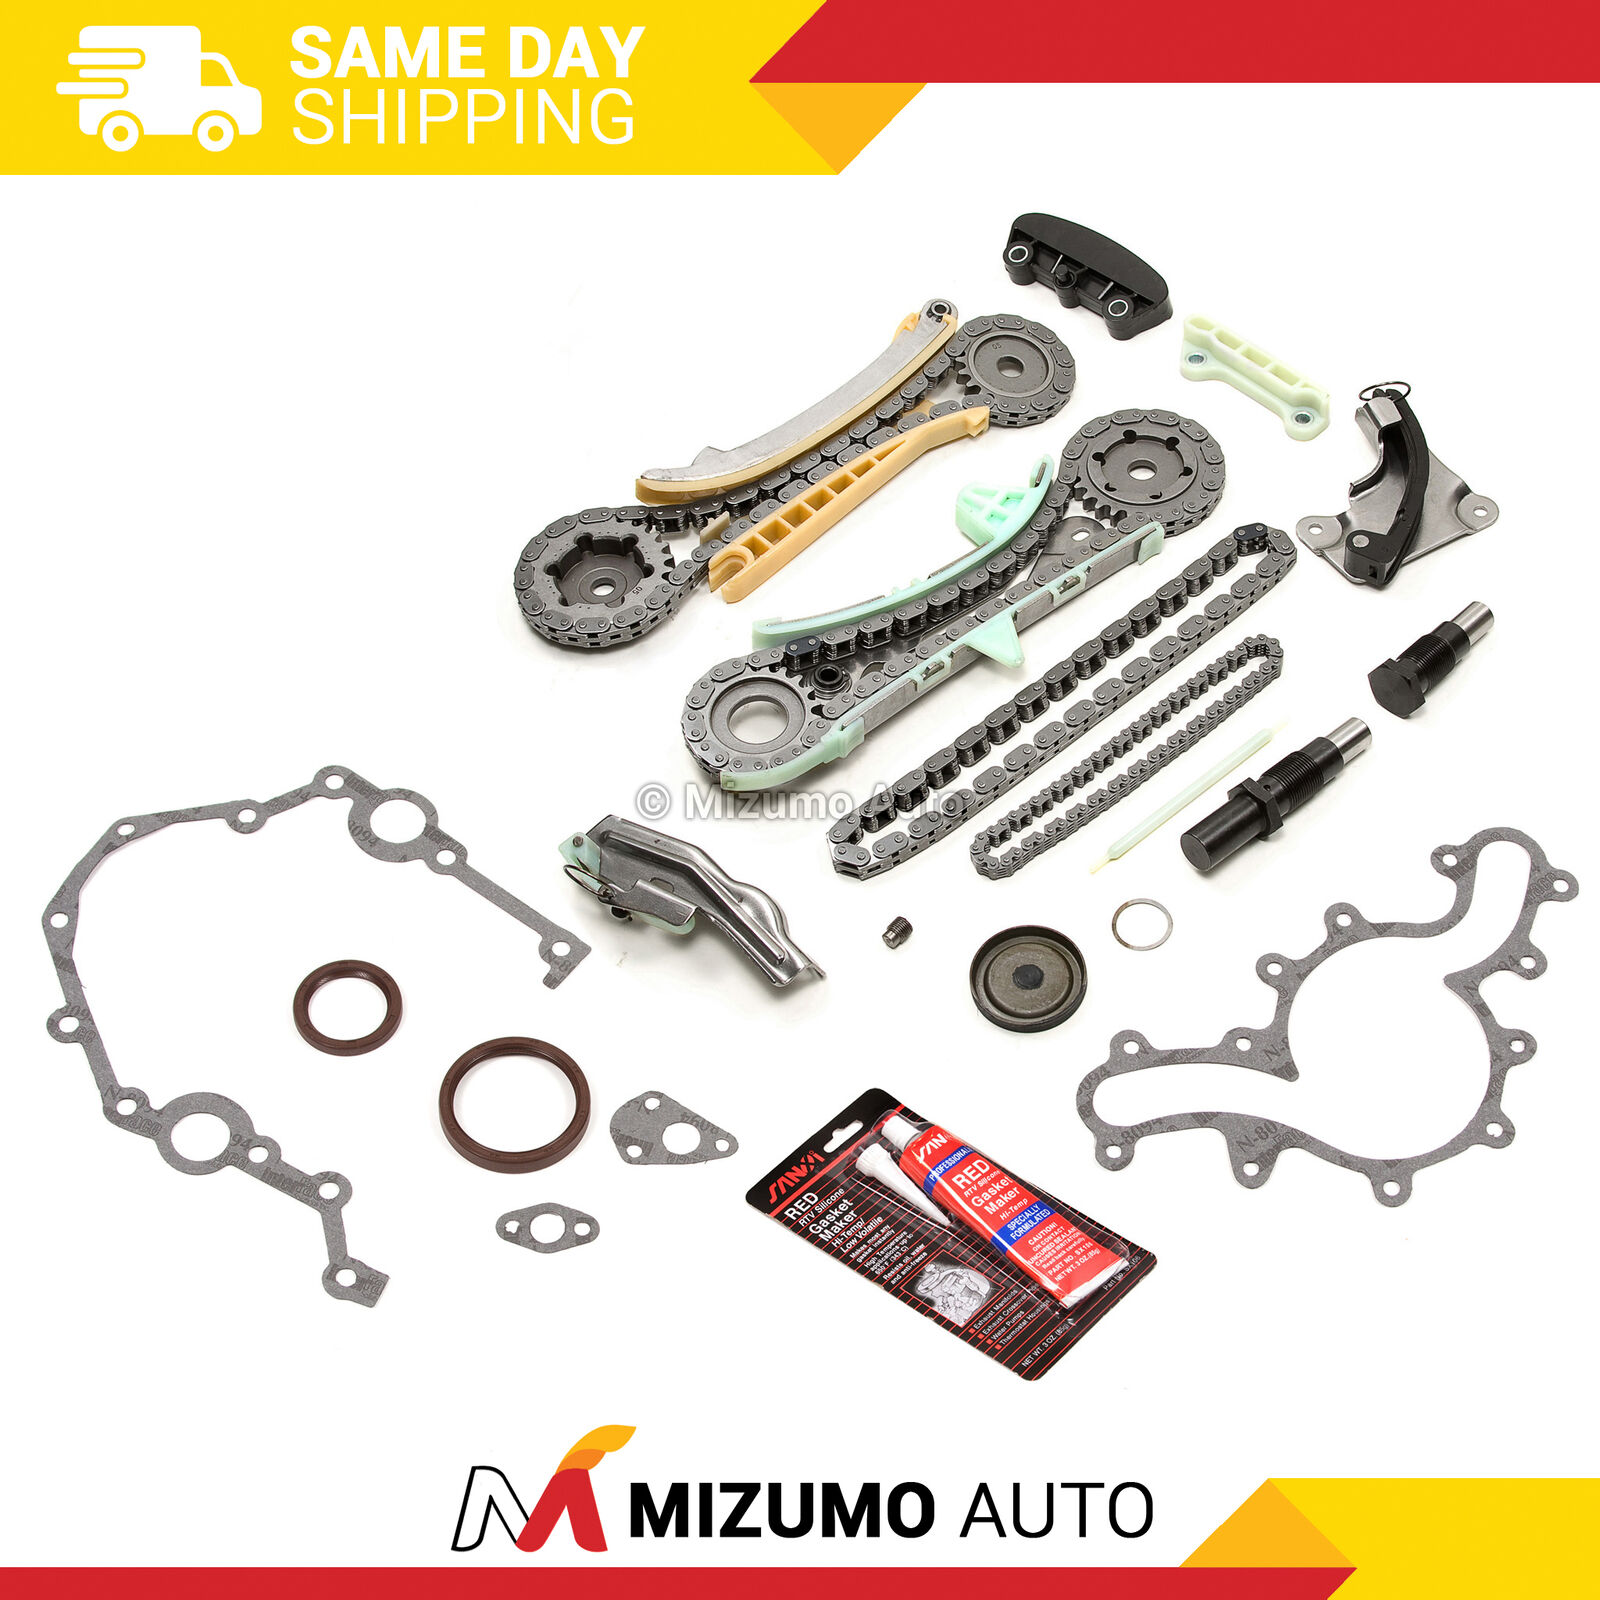 NEW 97-11 Ford Mercury Mazda 4.0L SOHC Timing Chain Kit, Cover Gasket, Oil Seals